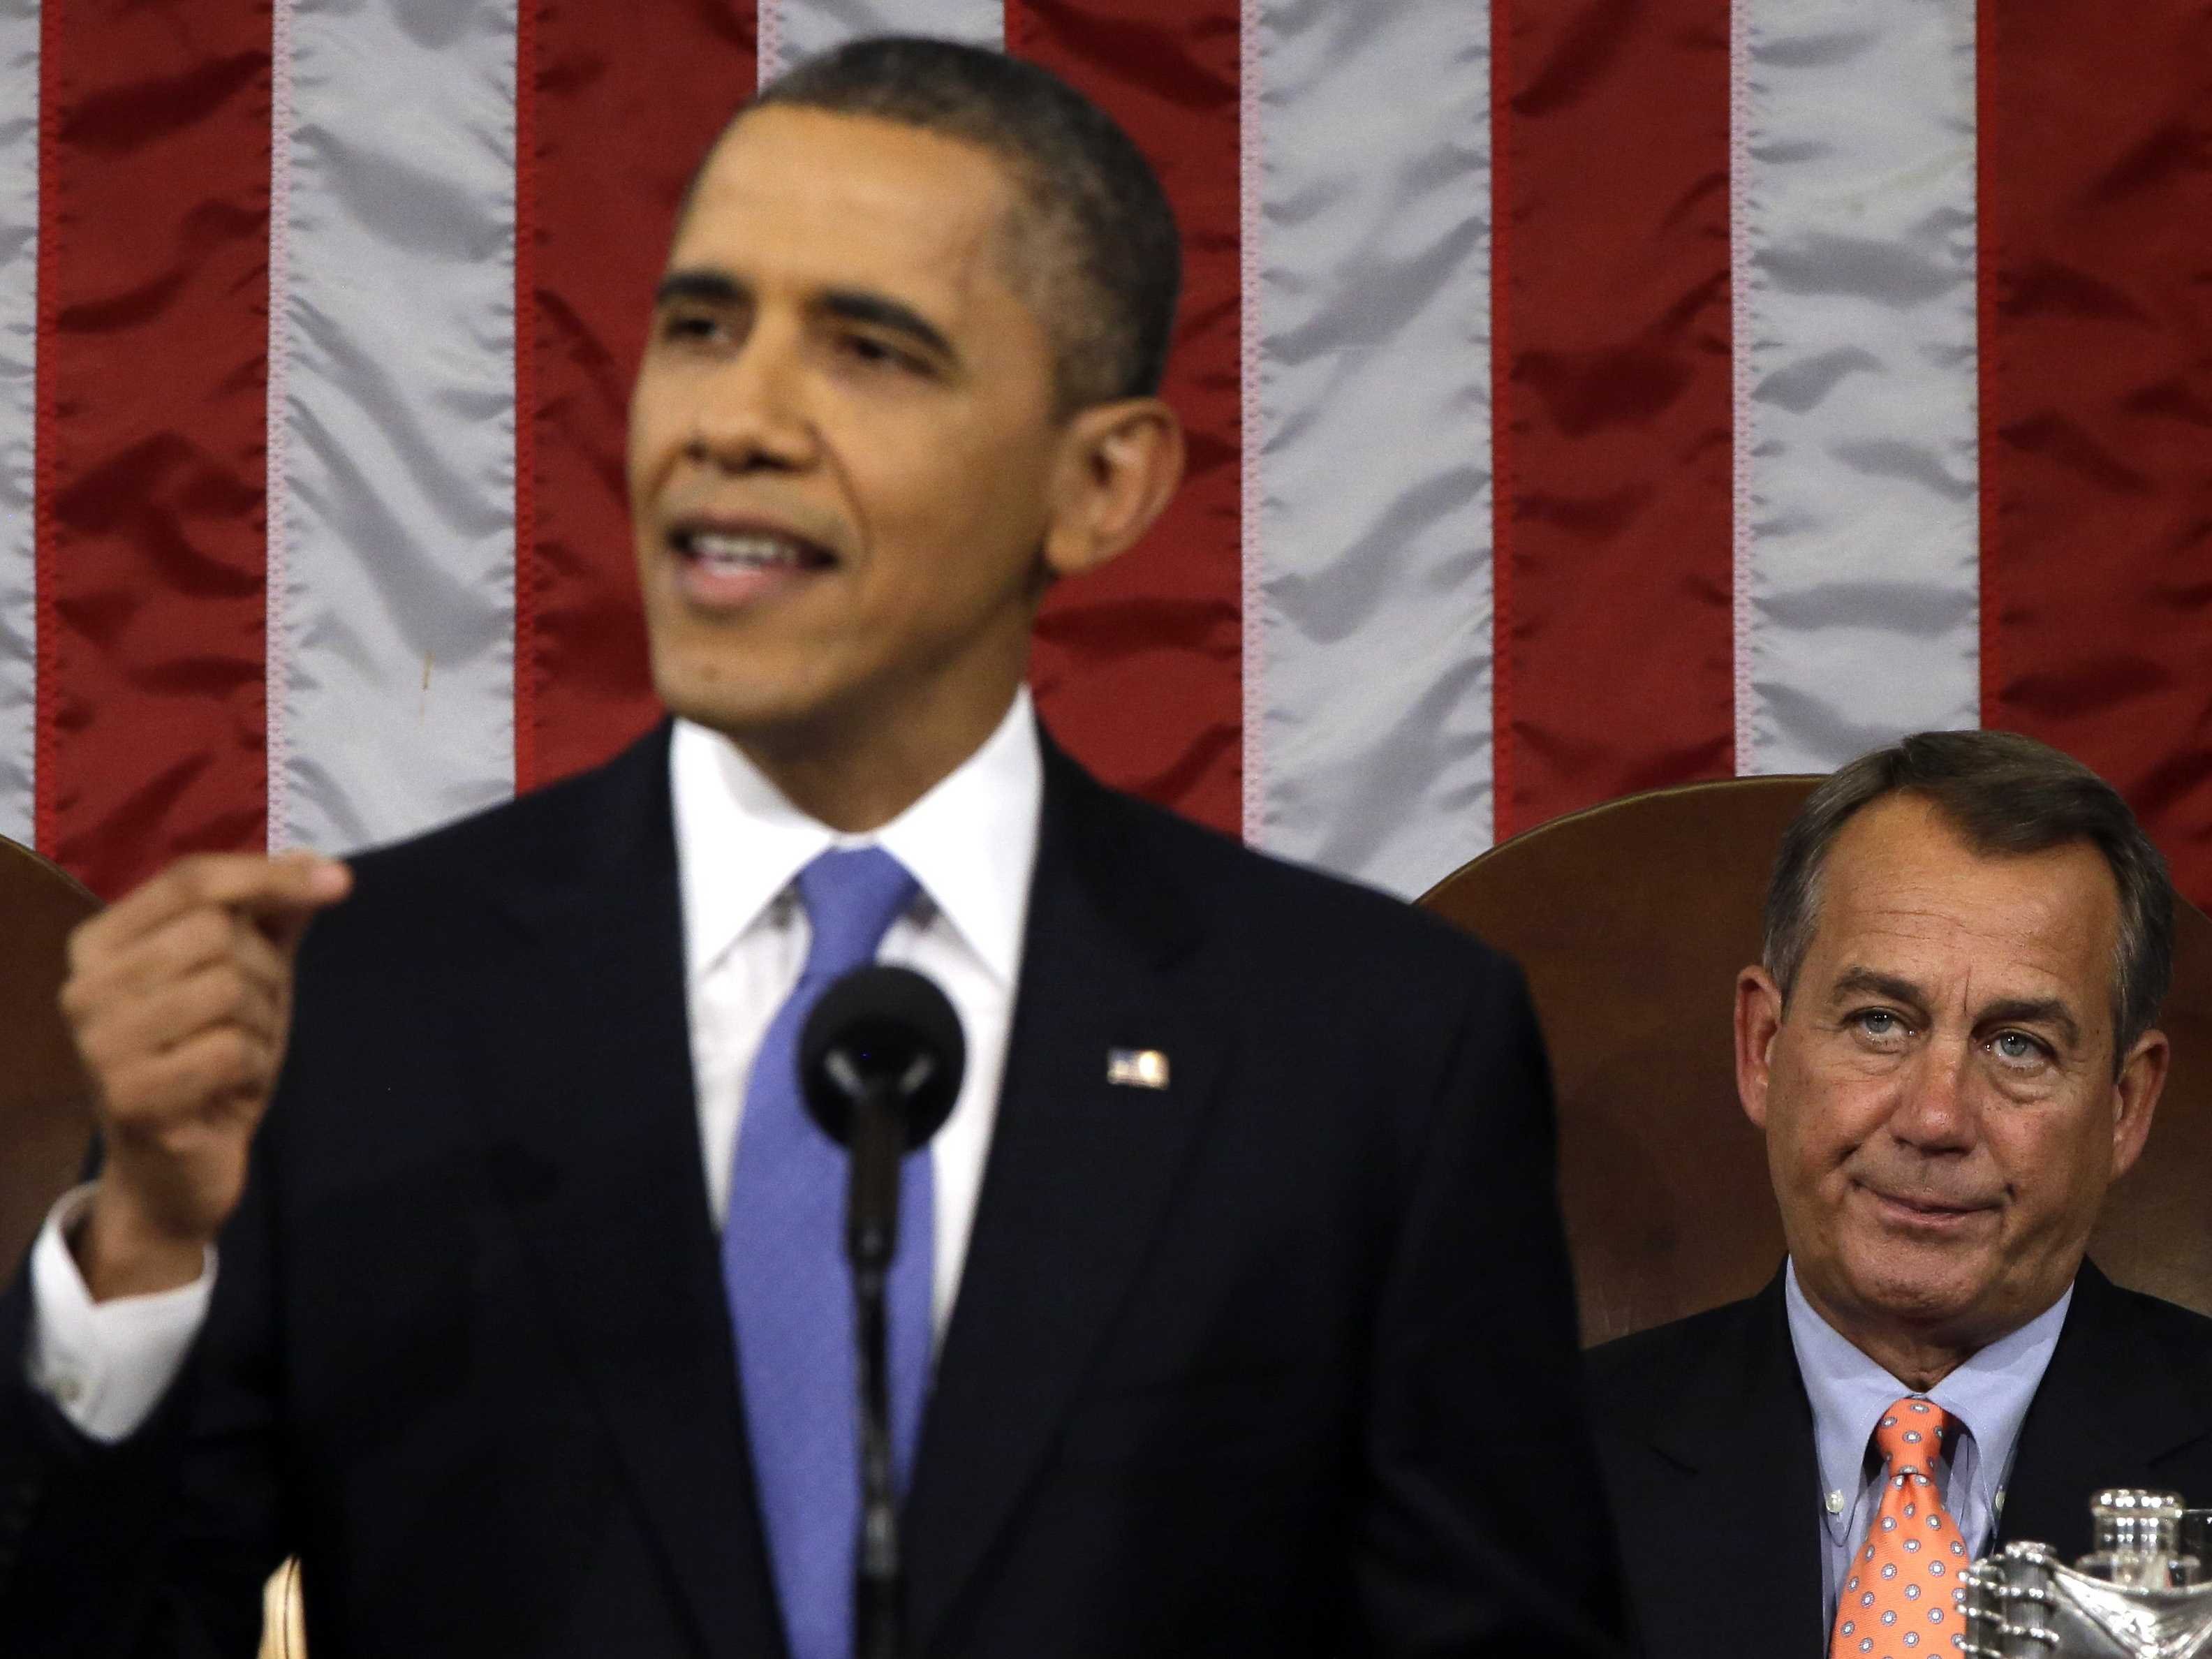 Obama announces support for exposition repeats in State of the Union address.